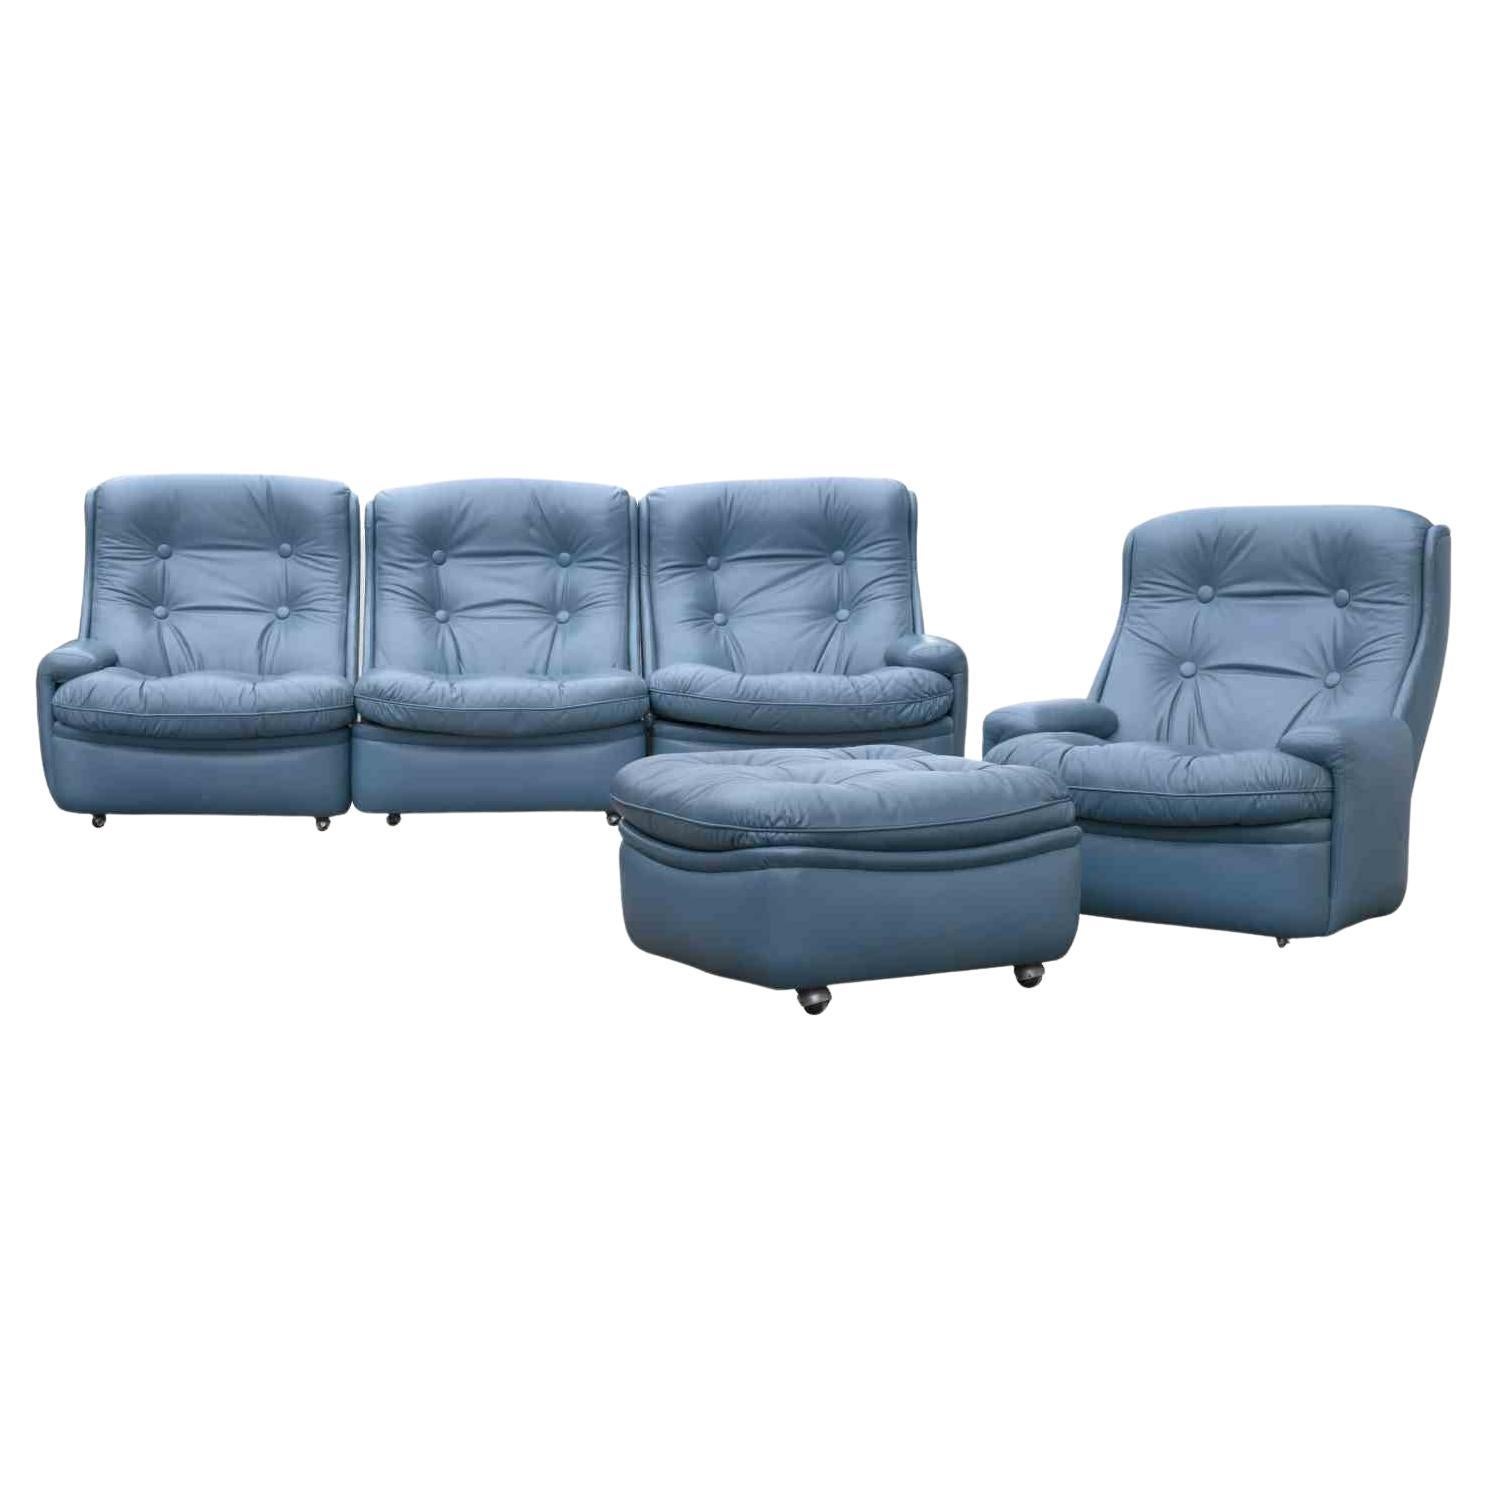 Set of Sofa, Armchair and Pouf by Michele Cadestin for Airbone, France 1970s For Sale